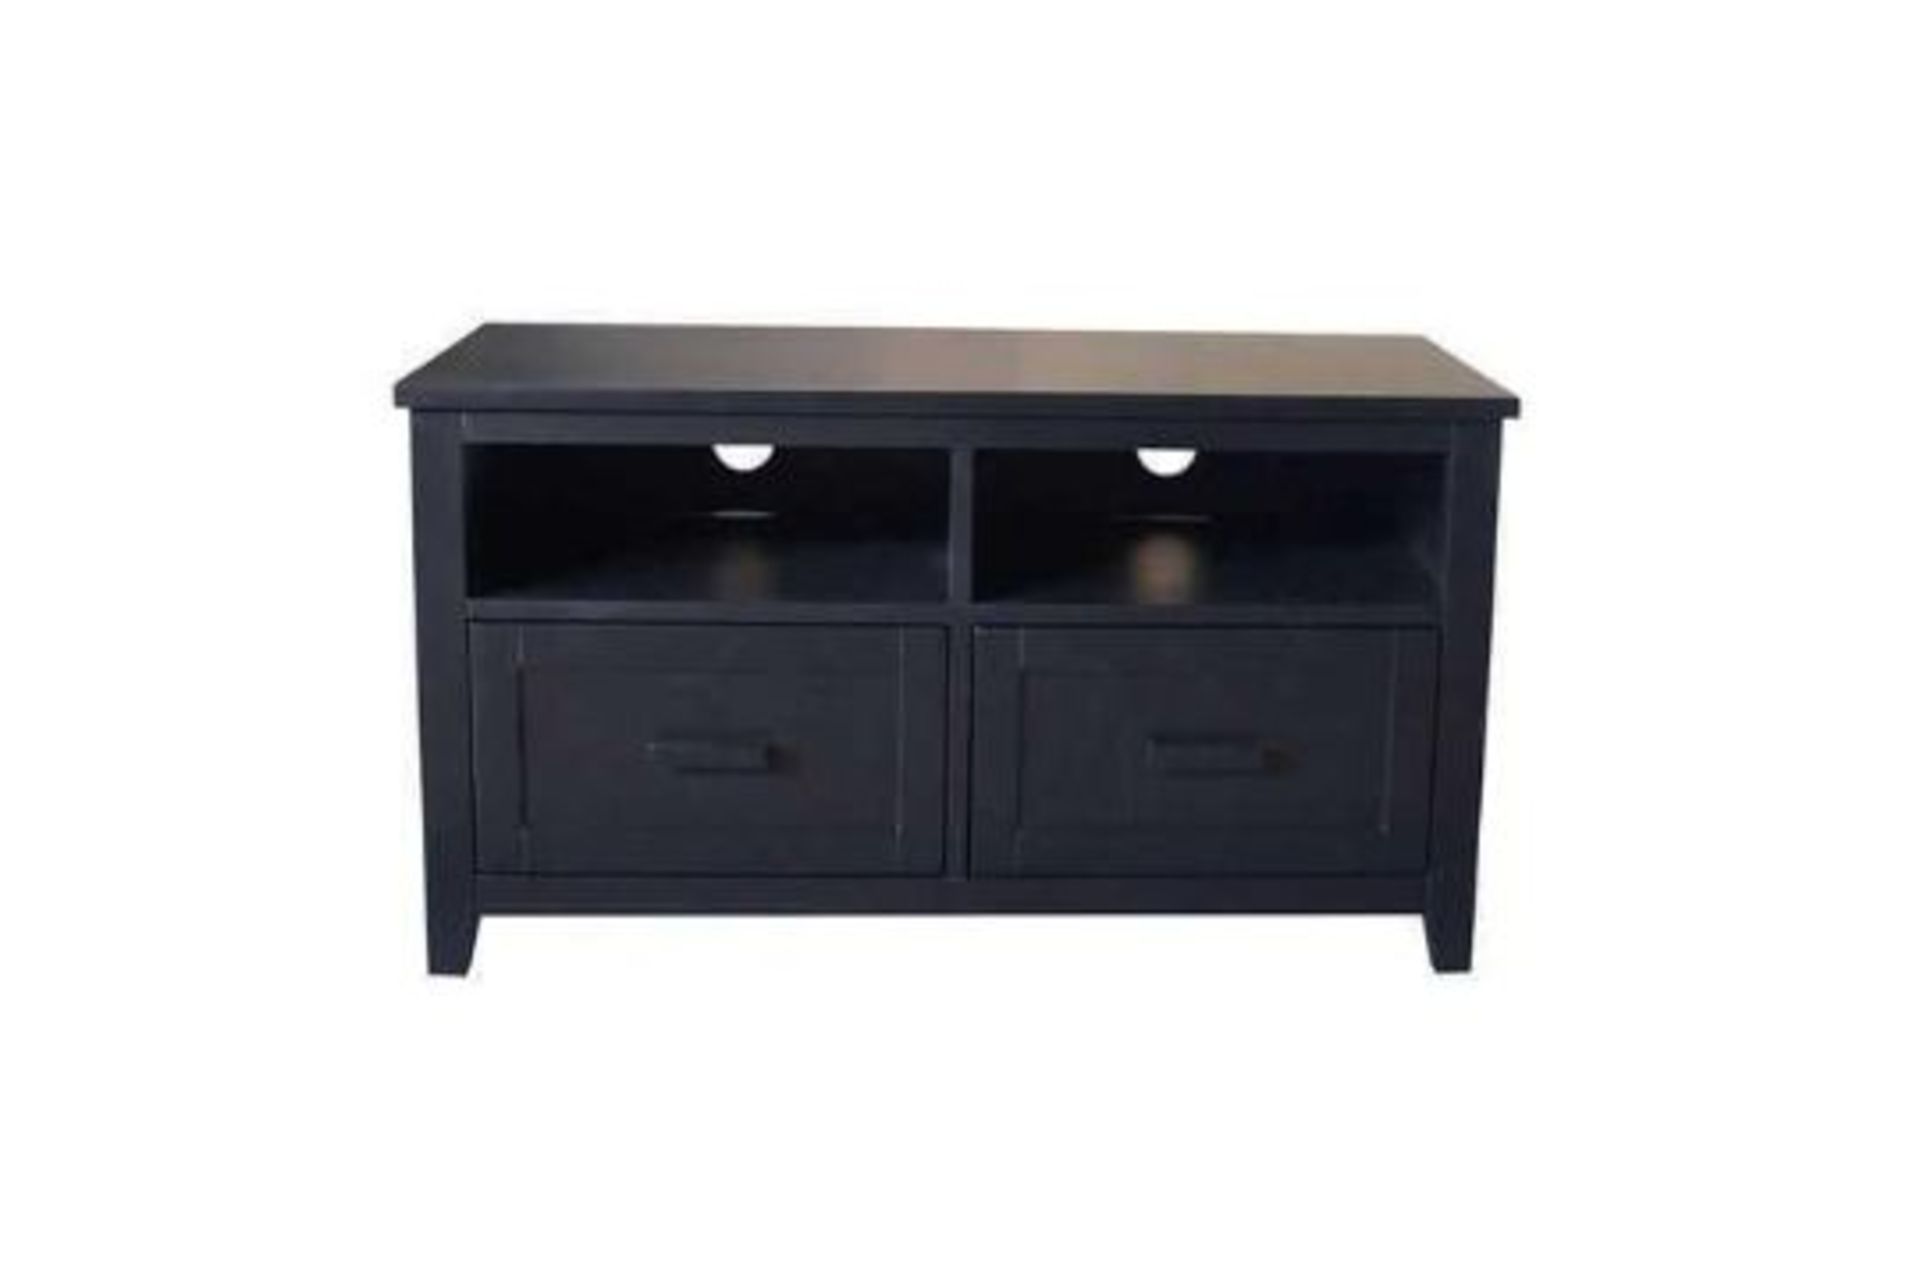 RRP £620 Boxed Brand New Fenton Black 2 Drawer Tv Unit (Appraisals Available Upon Request) (Pictures